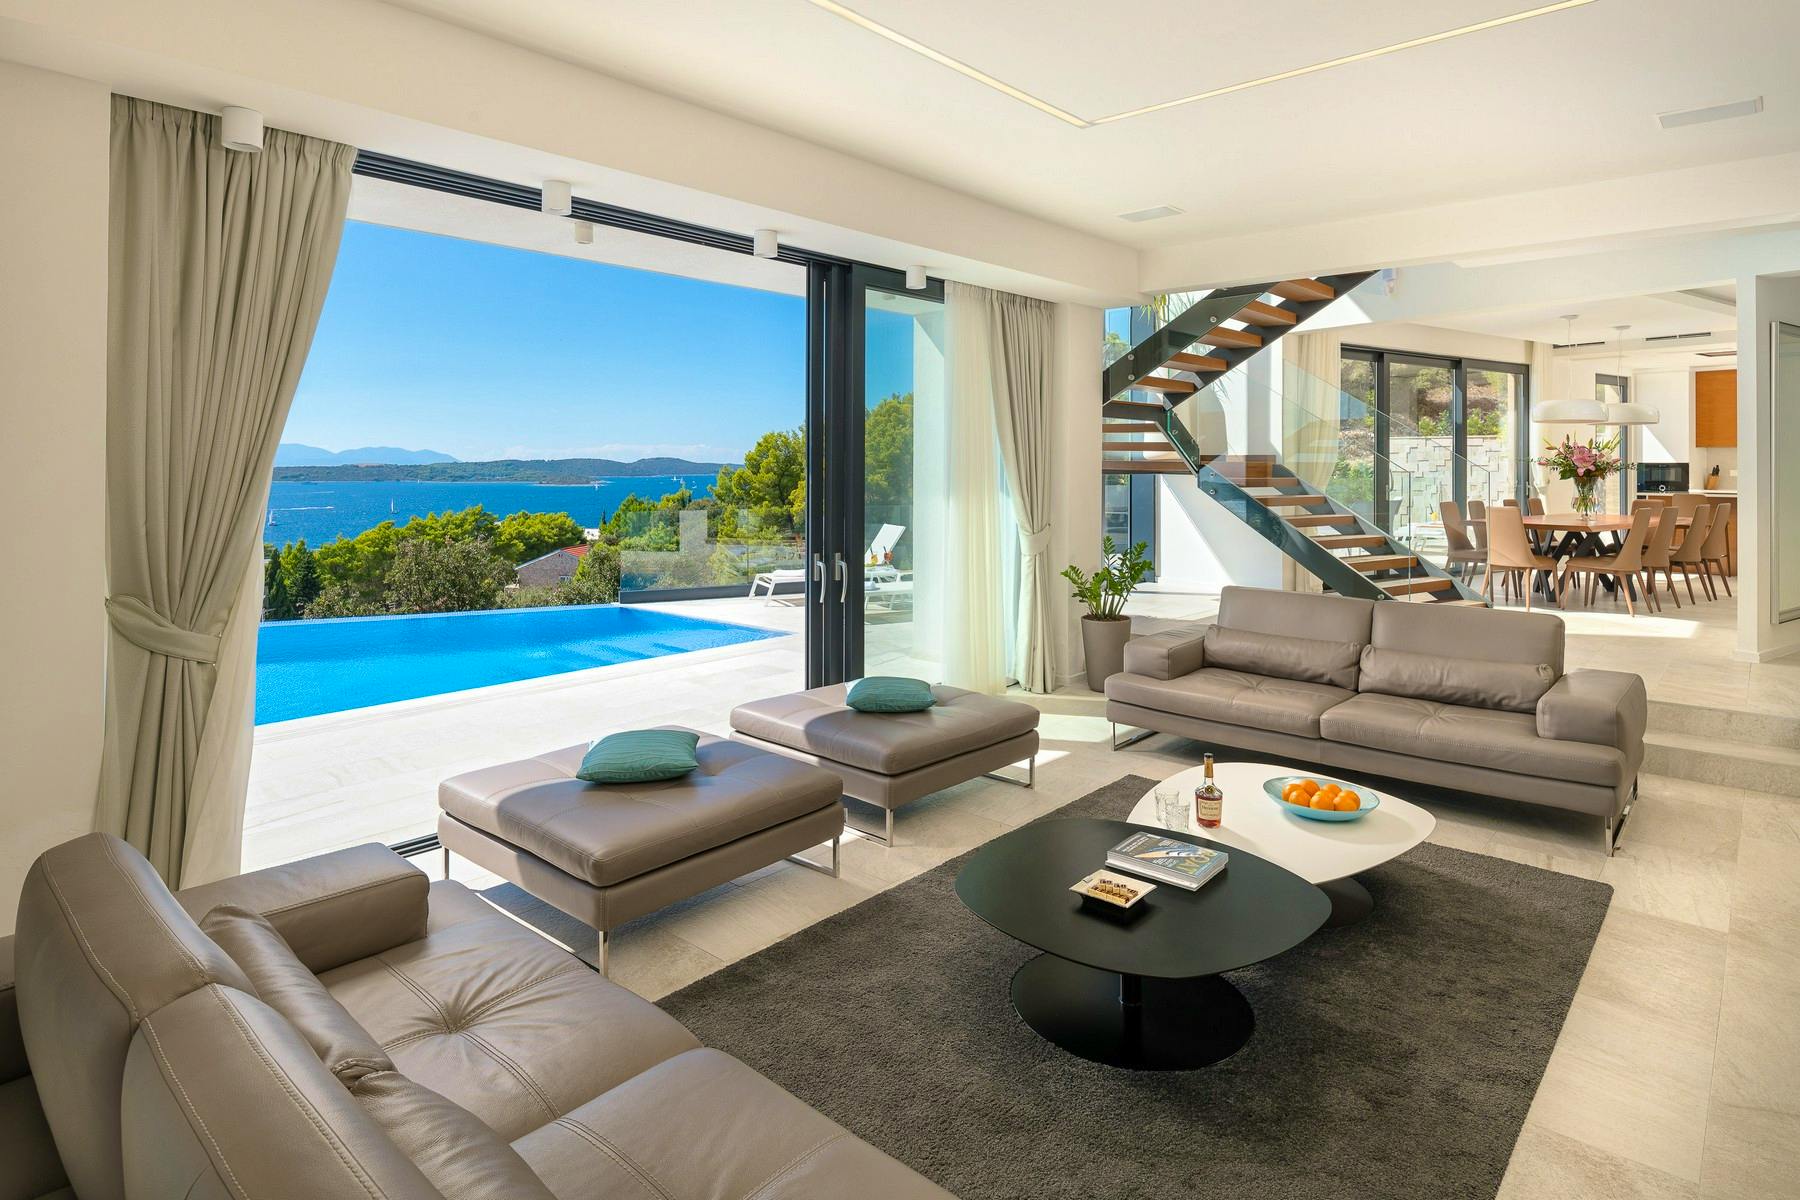 Open concept living area with sea view